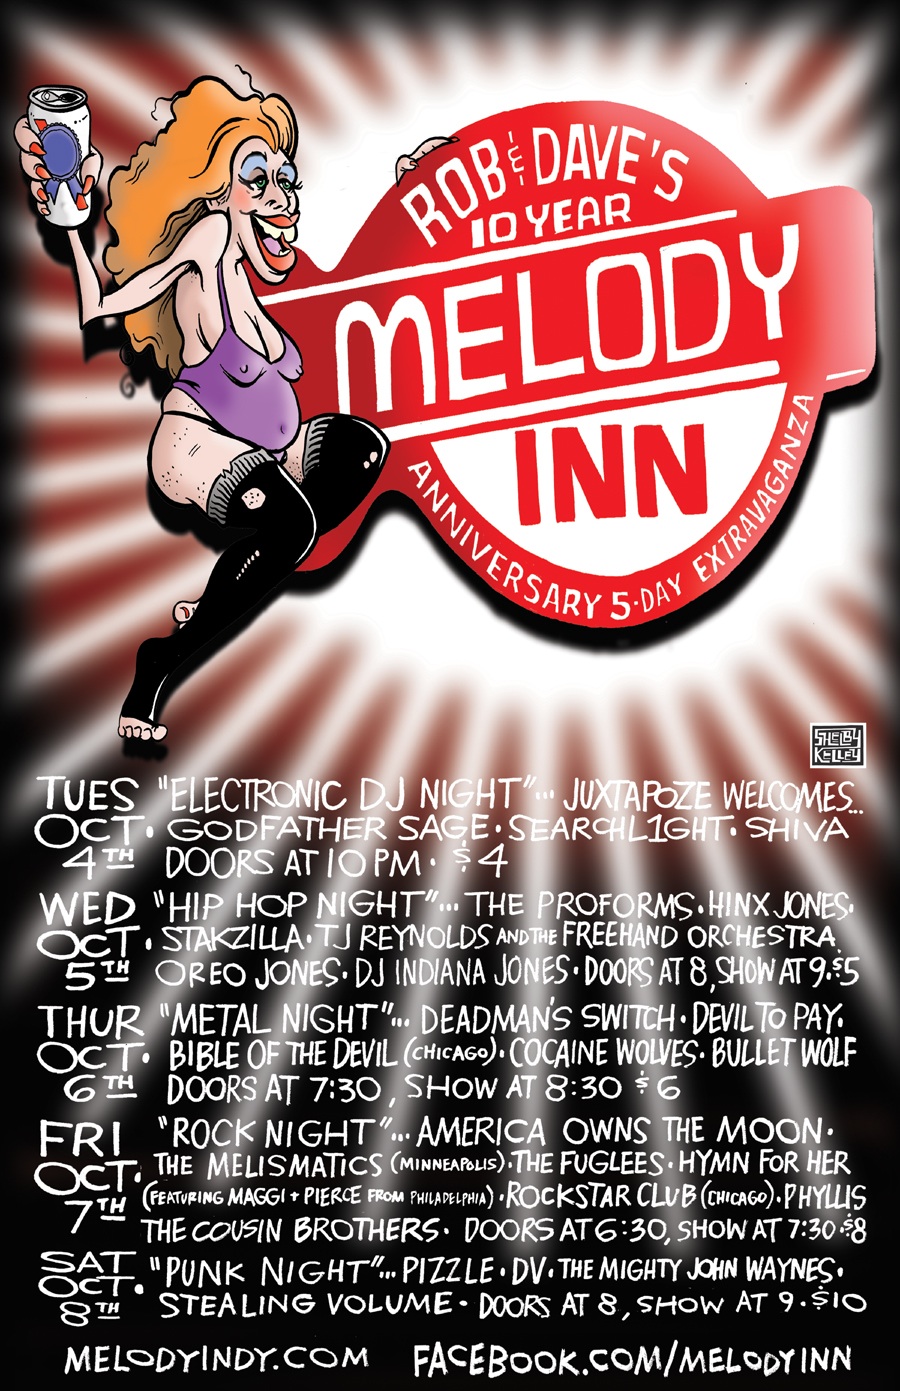 Upcoming Event: Rob & Dave's 5-Day Extravaganza (The Melody Inn's 10-Year Anniversary) 